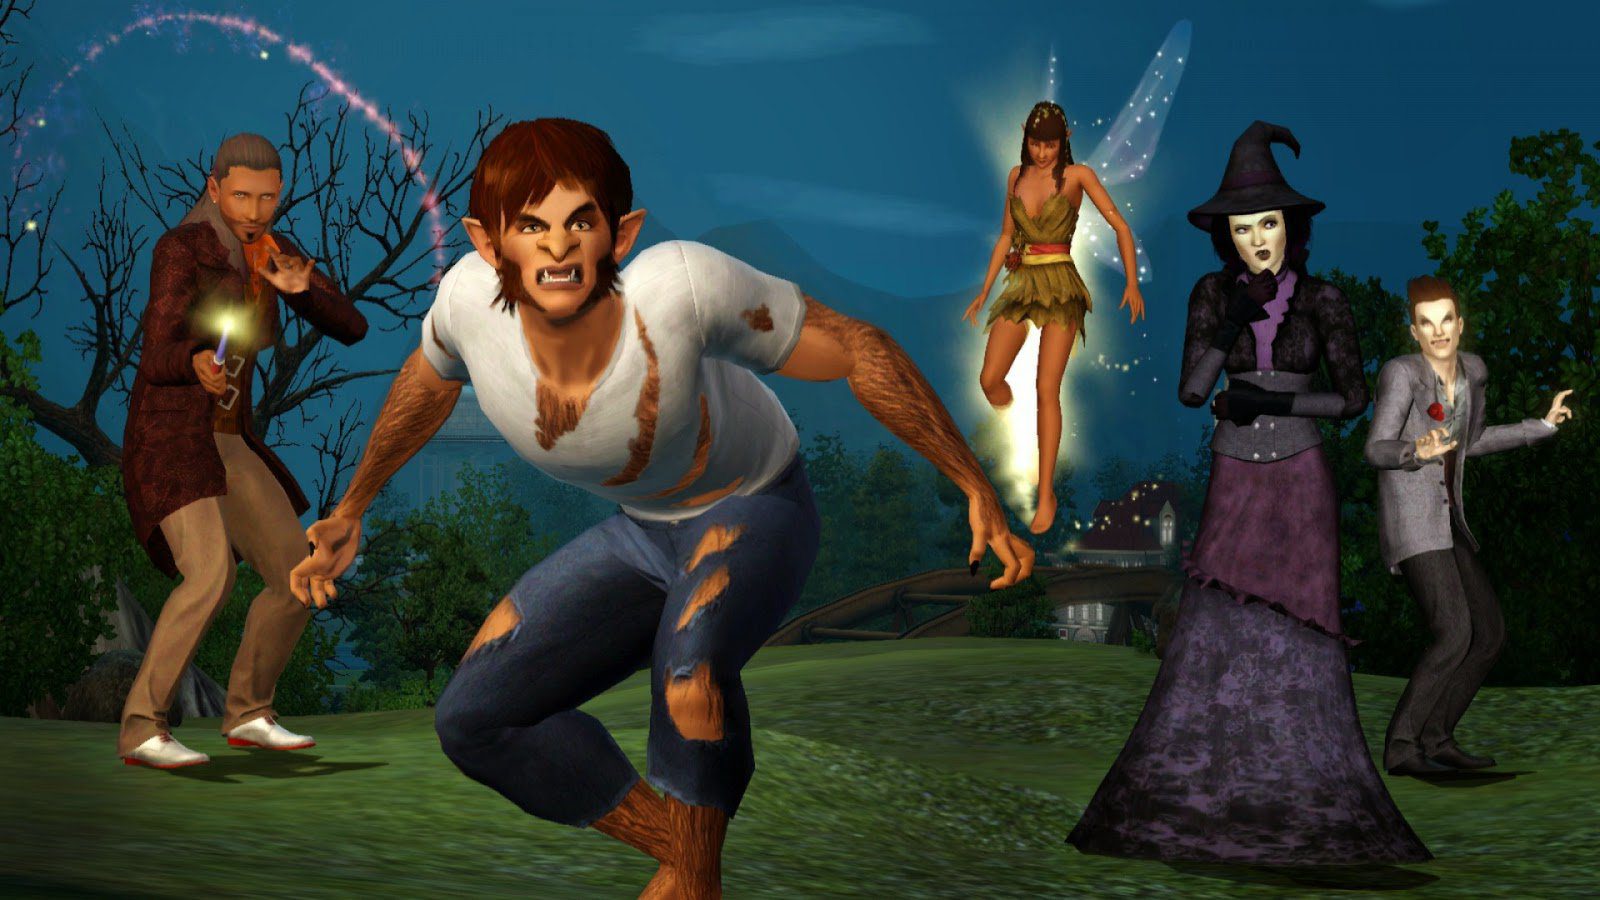 Die Sims 4: Realm of Magic ist wie Harry Potter die CW trifft